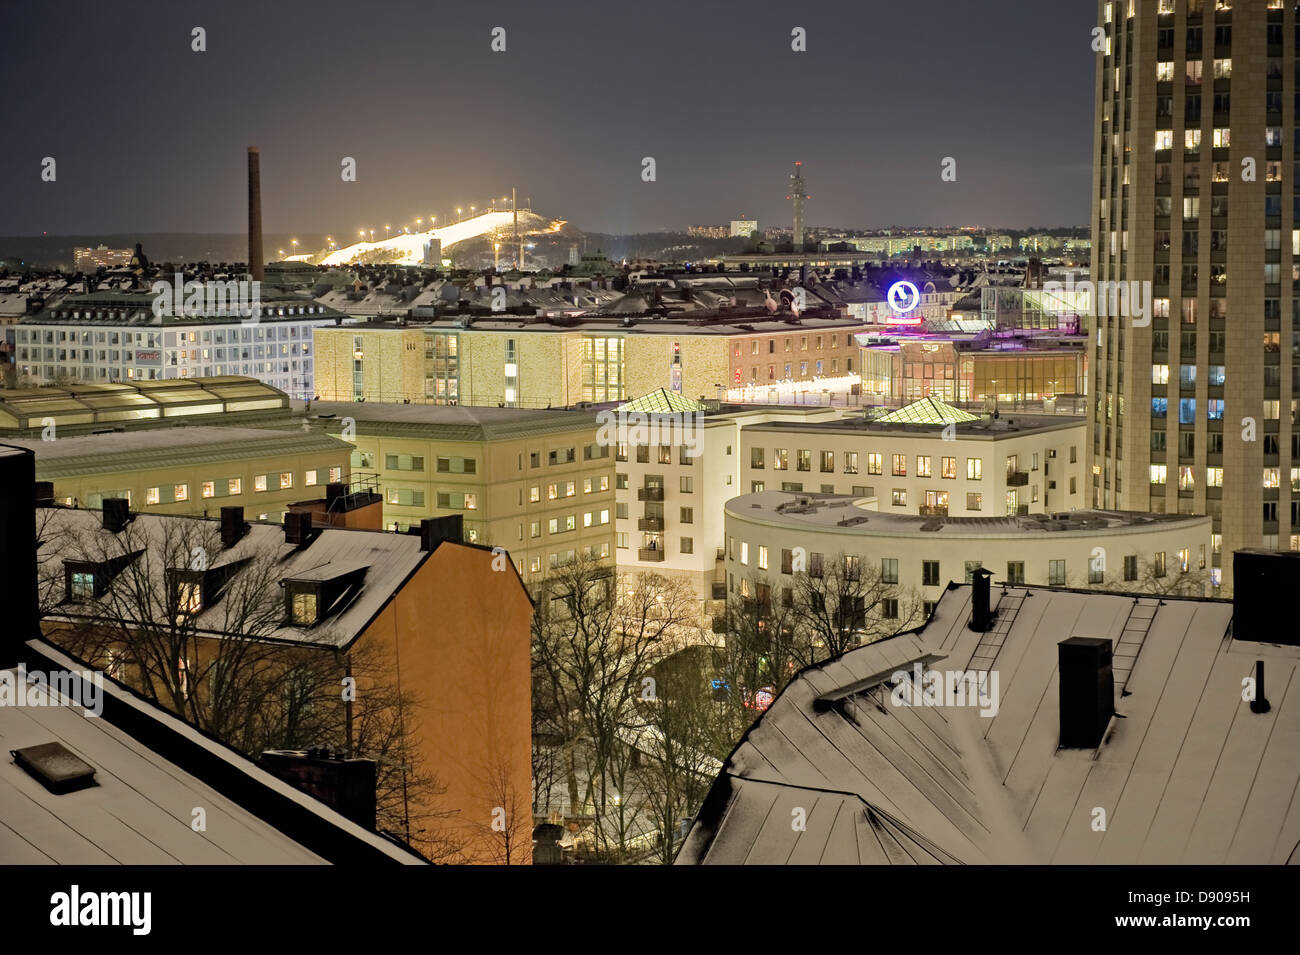 View over a city at night, Sweden. Stock Photo